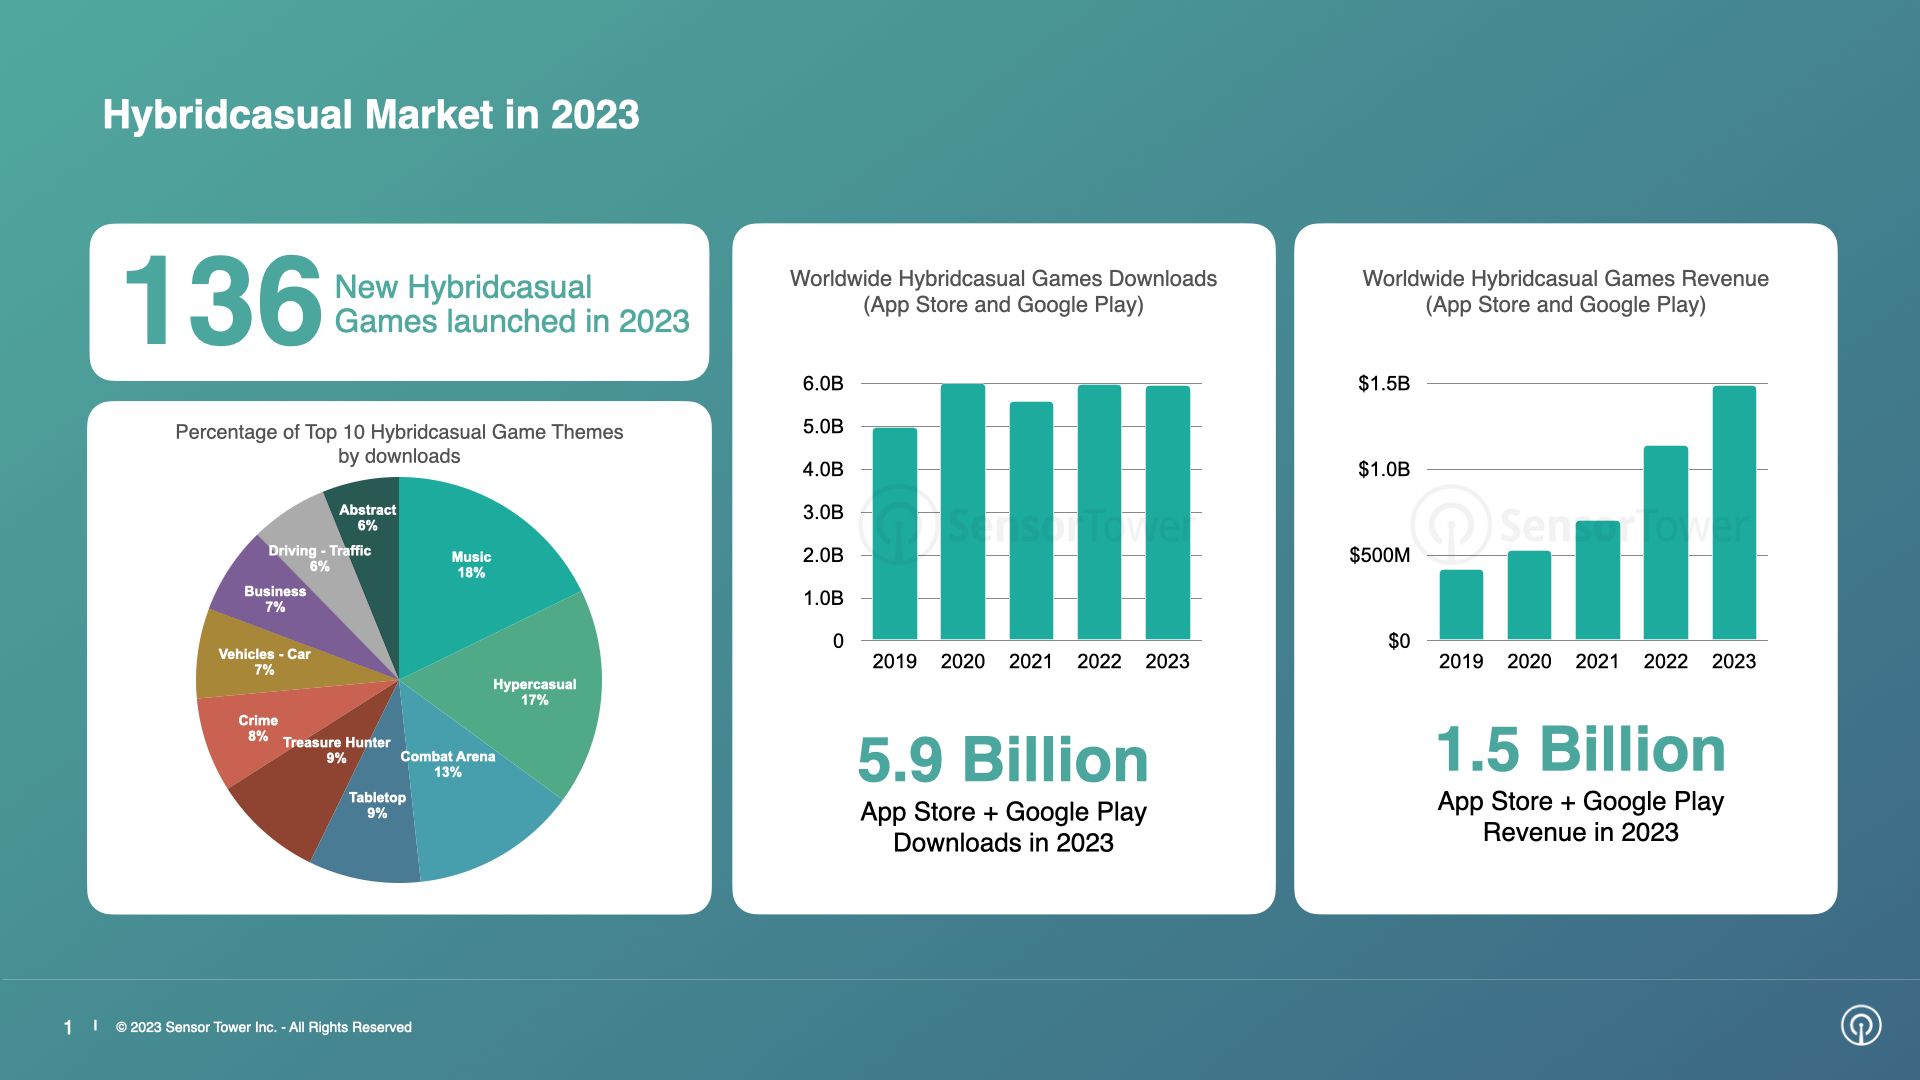 Hybridcasual Market Trends in 2023